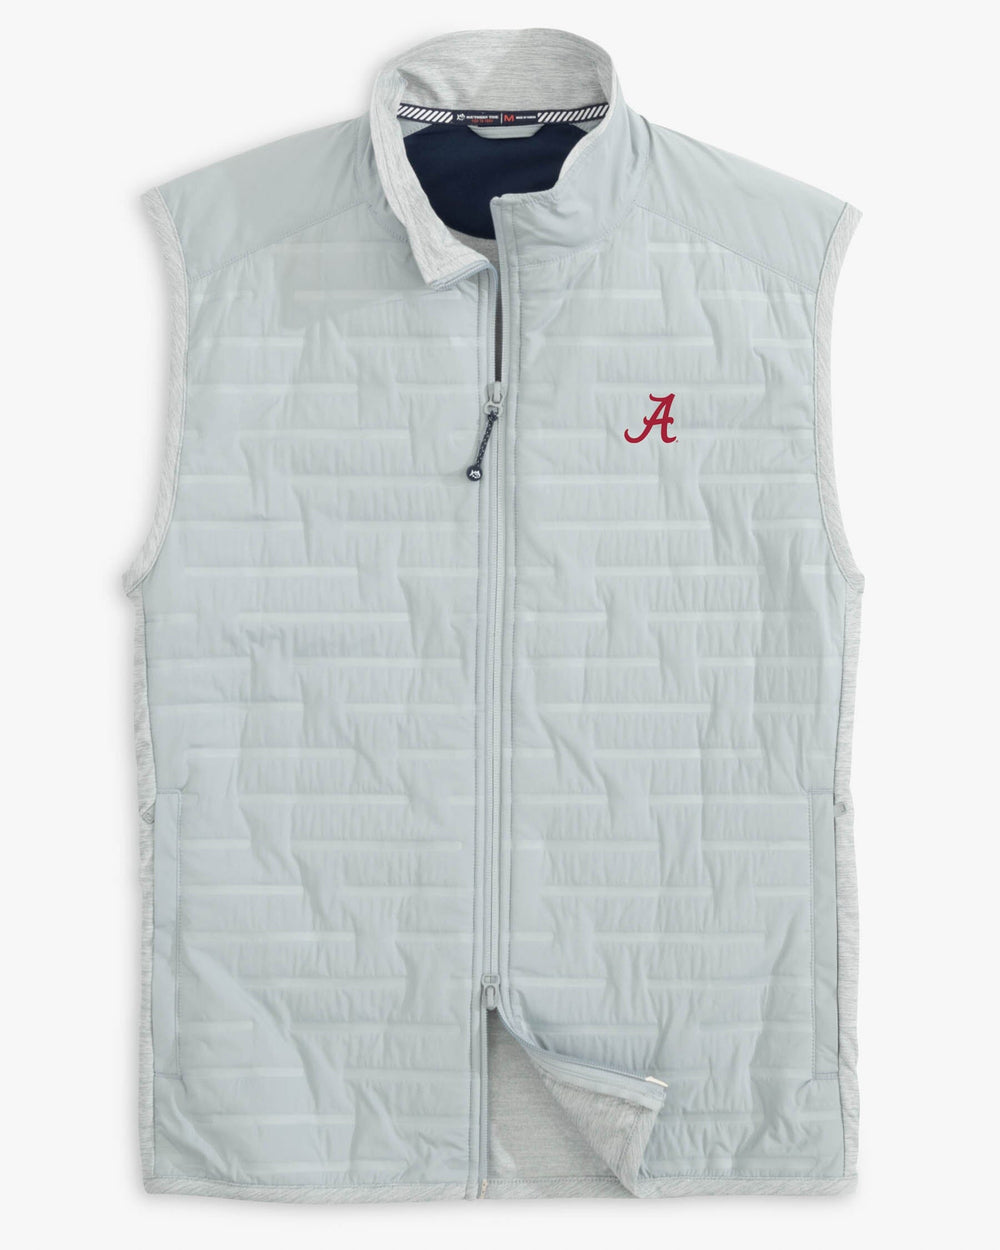 The front view of the Southern Tide Alabama Crimson Tide Abercorn Vest by Southern Tide - Gravel Grey